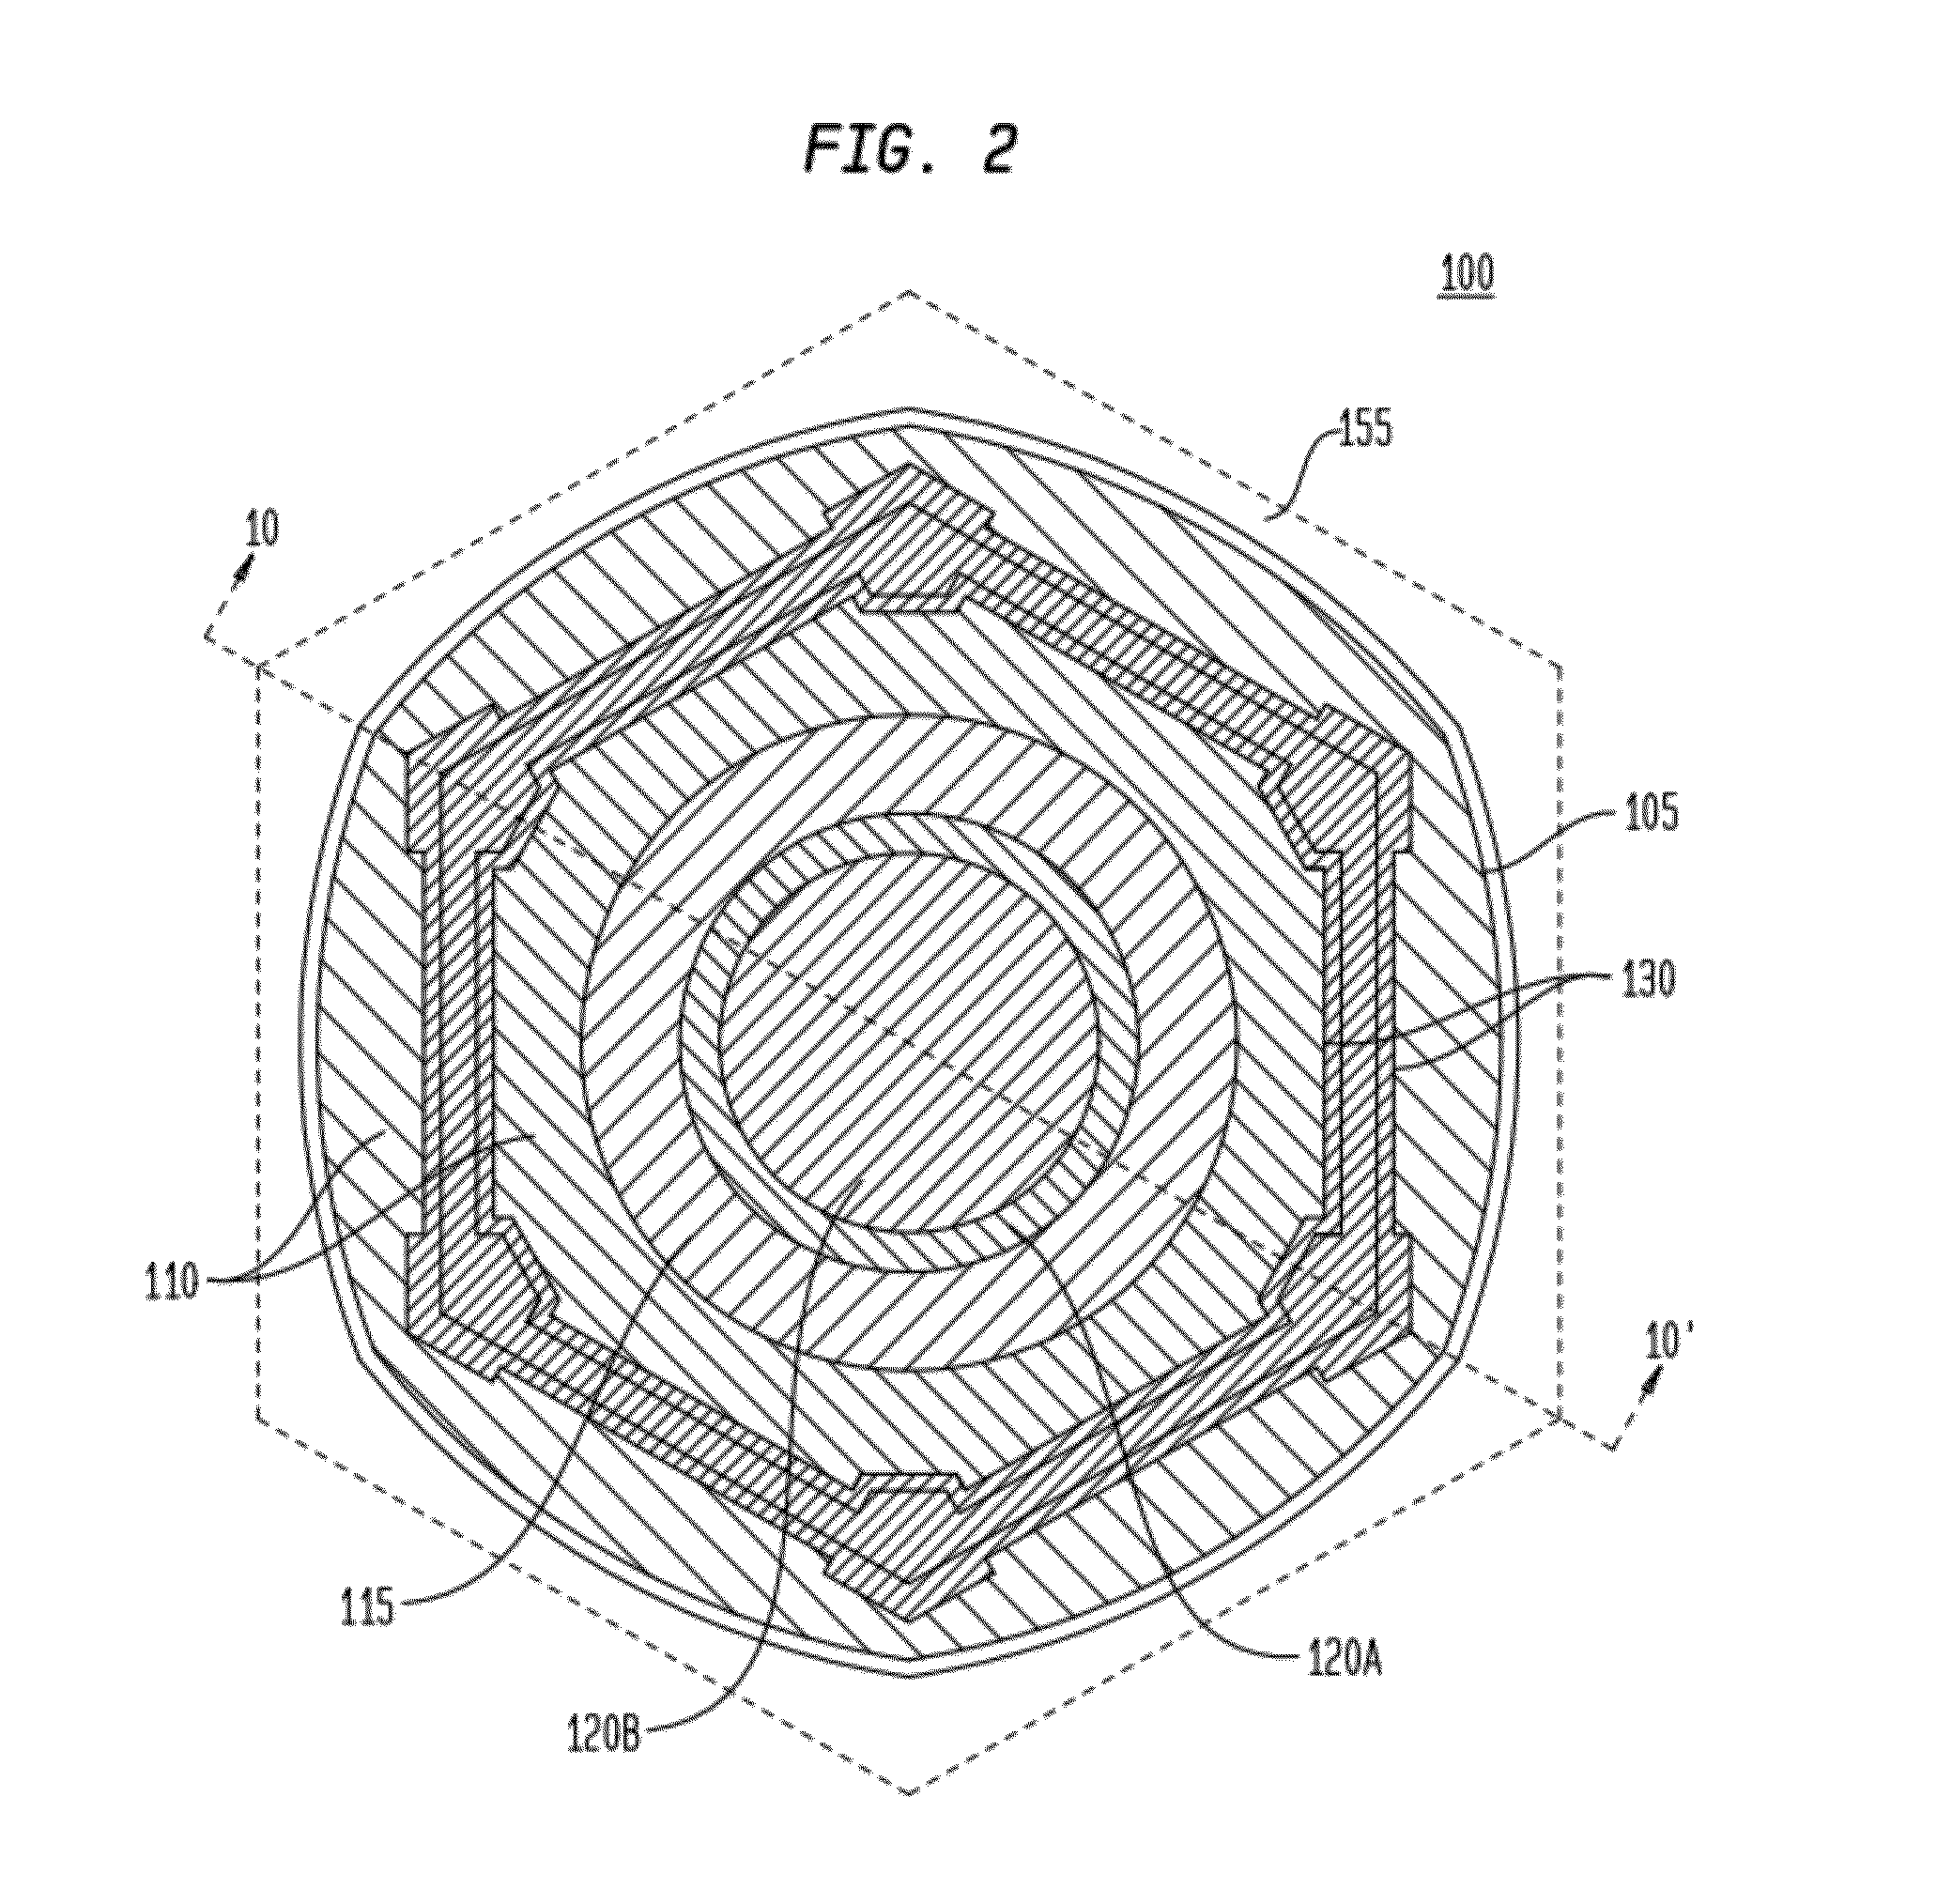 Printable Composition of a Liquid or Gel Suspension of Diodes